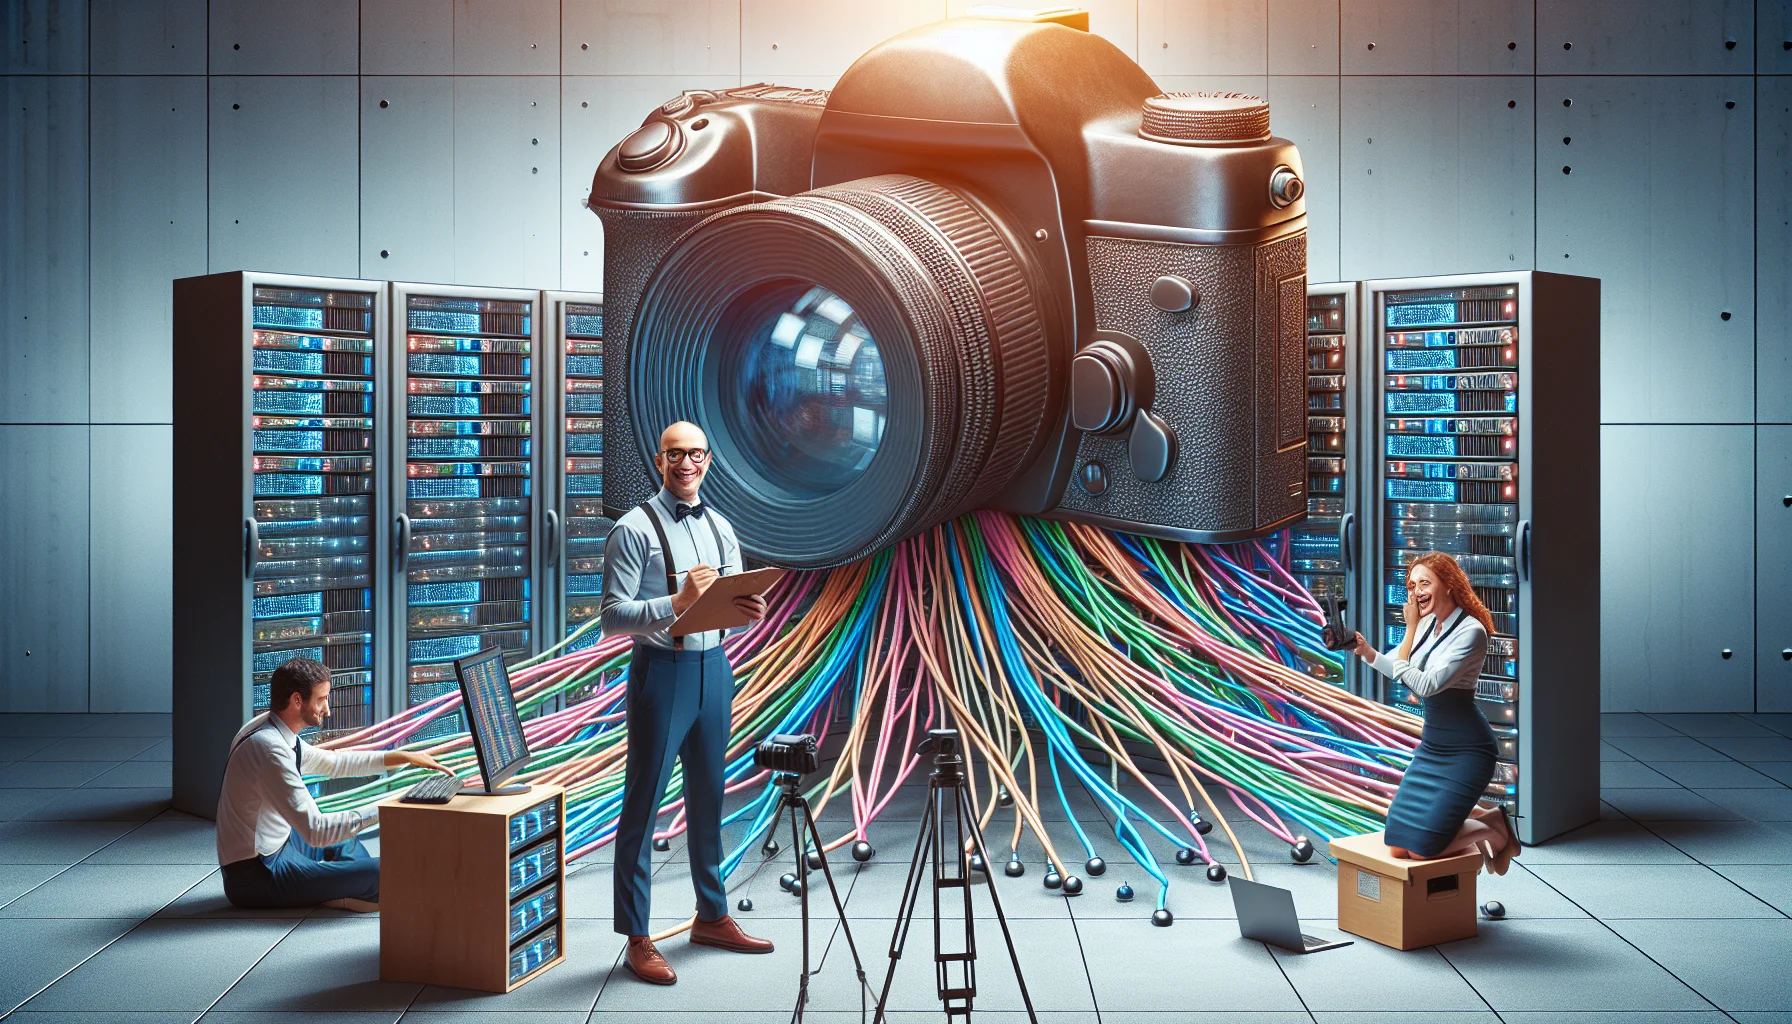 Create a humorous and whimsical scenario displaying a web hosting service targeted towards photographers. Picture an oversized camera with a web of colorful lines emanating from it to represent the World Wide Web. Place this in an environment traditionally associated with web hosting, like server racks, but with a twist: they're in the shape of tripods. In the scene, include two characters who are busy at work managing the connections. A Caucasian male with glasses, holding a clipboard, and a Hispanic female using a laptop, both laughing and exchanging banter. The ambiance should be buoyant and enticing.